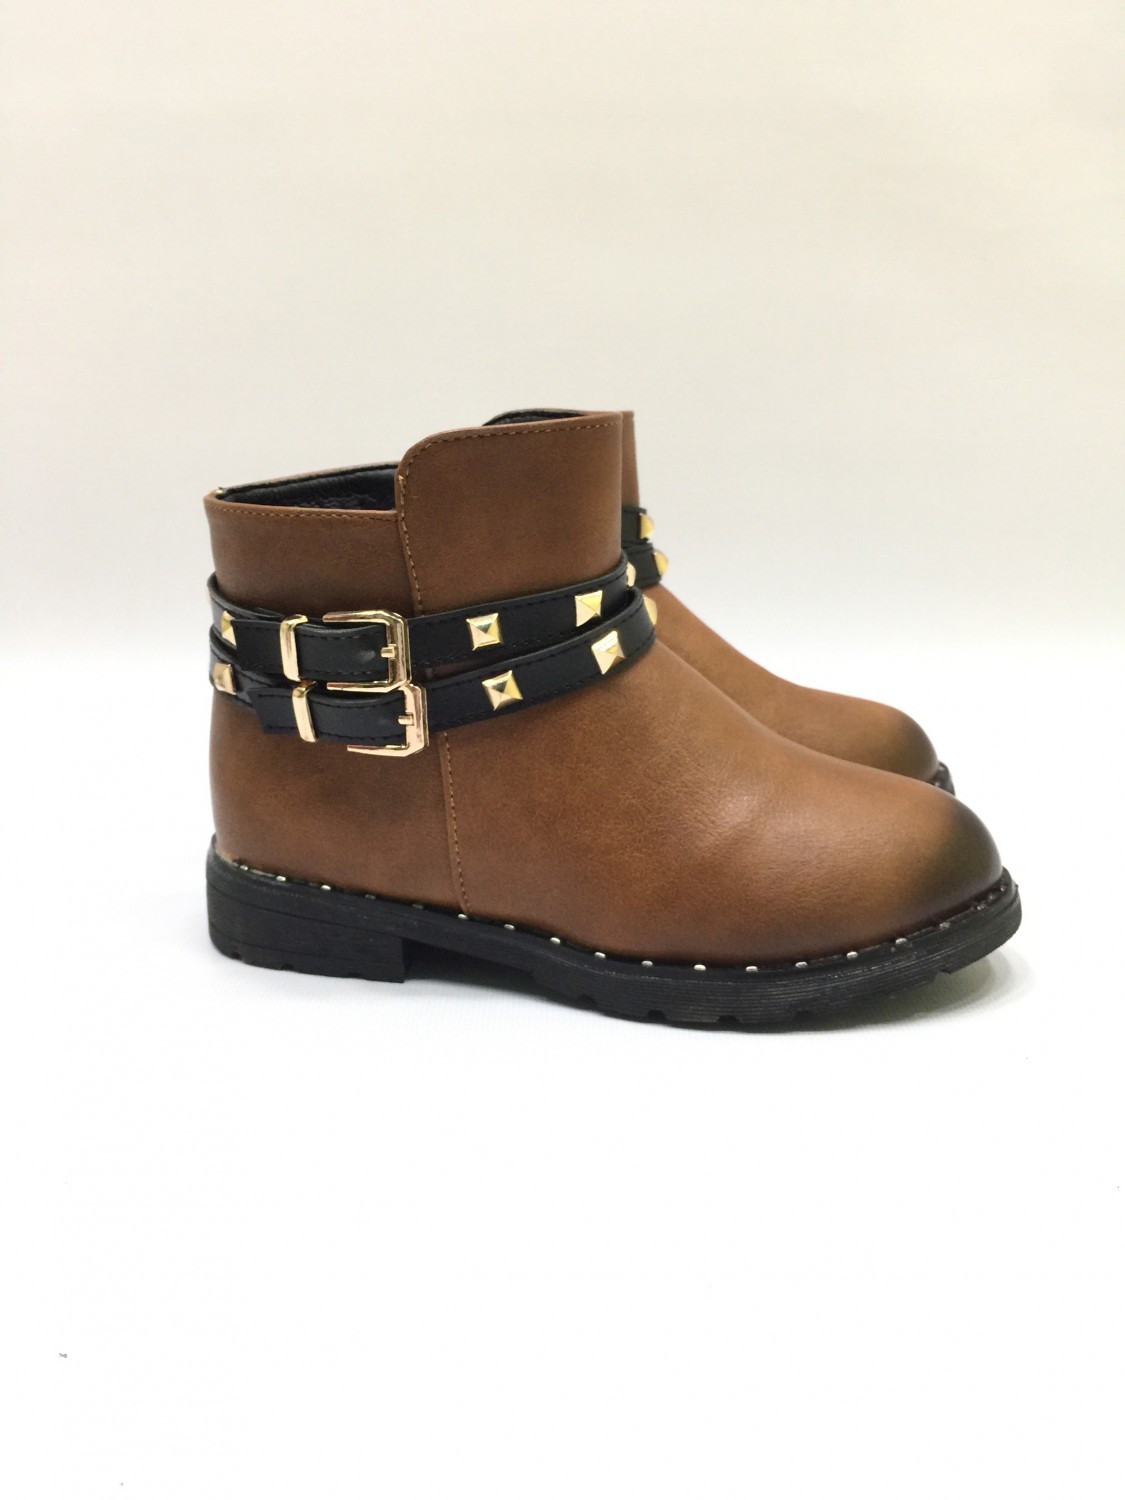 Brown Ankle Boots With Black Belts and Studs